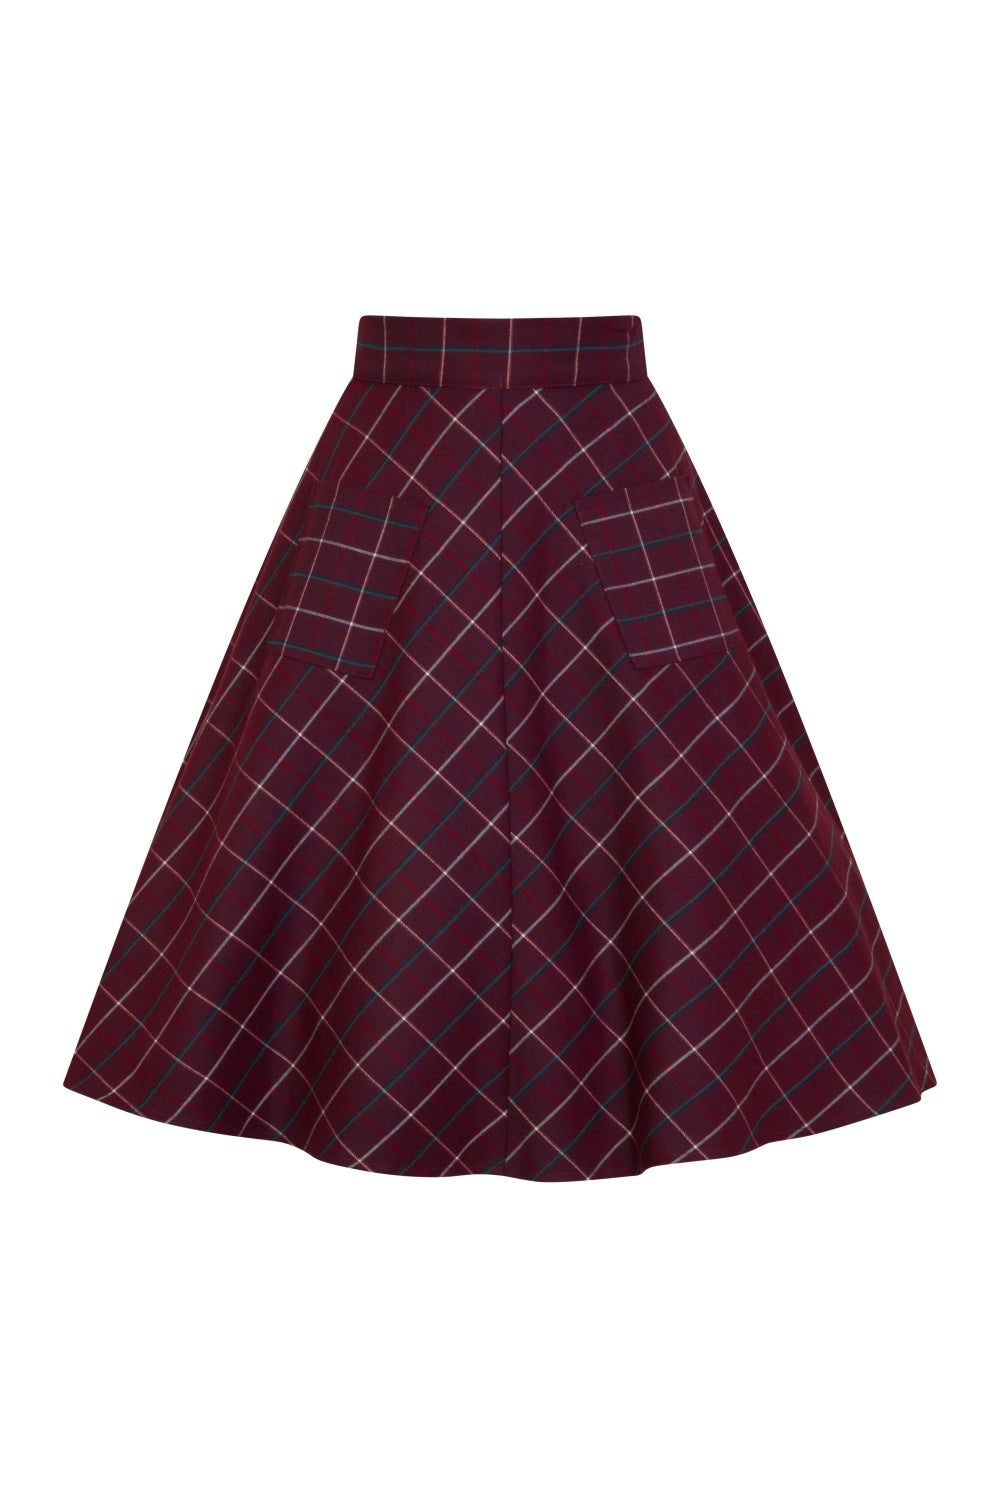 Plum coloured fit and flare skirt with blue, white and red check front and two large front pockets